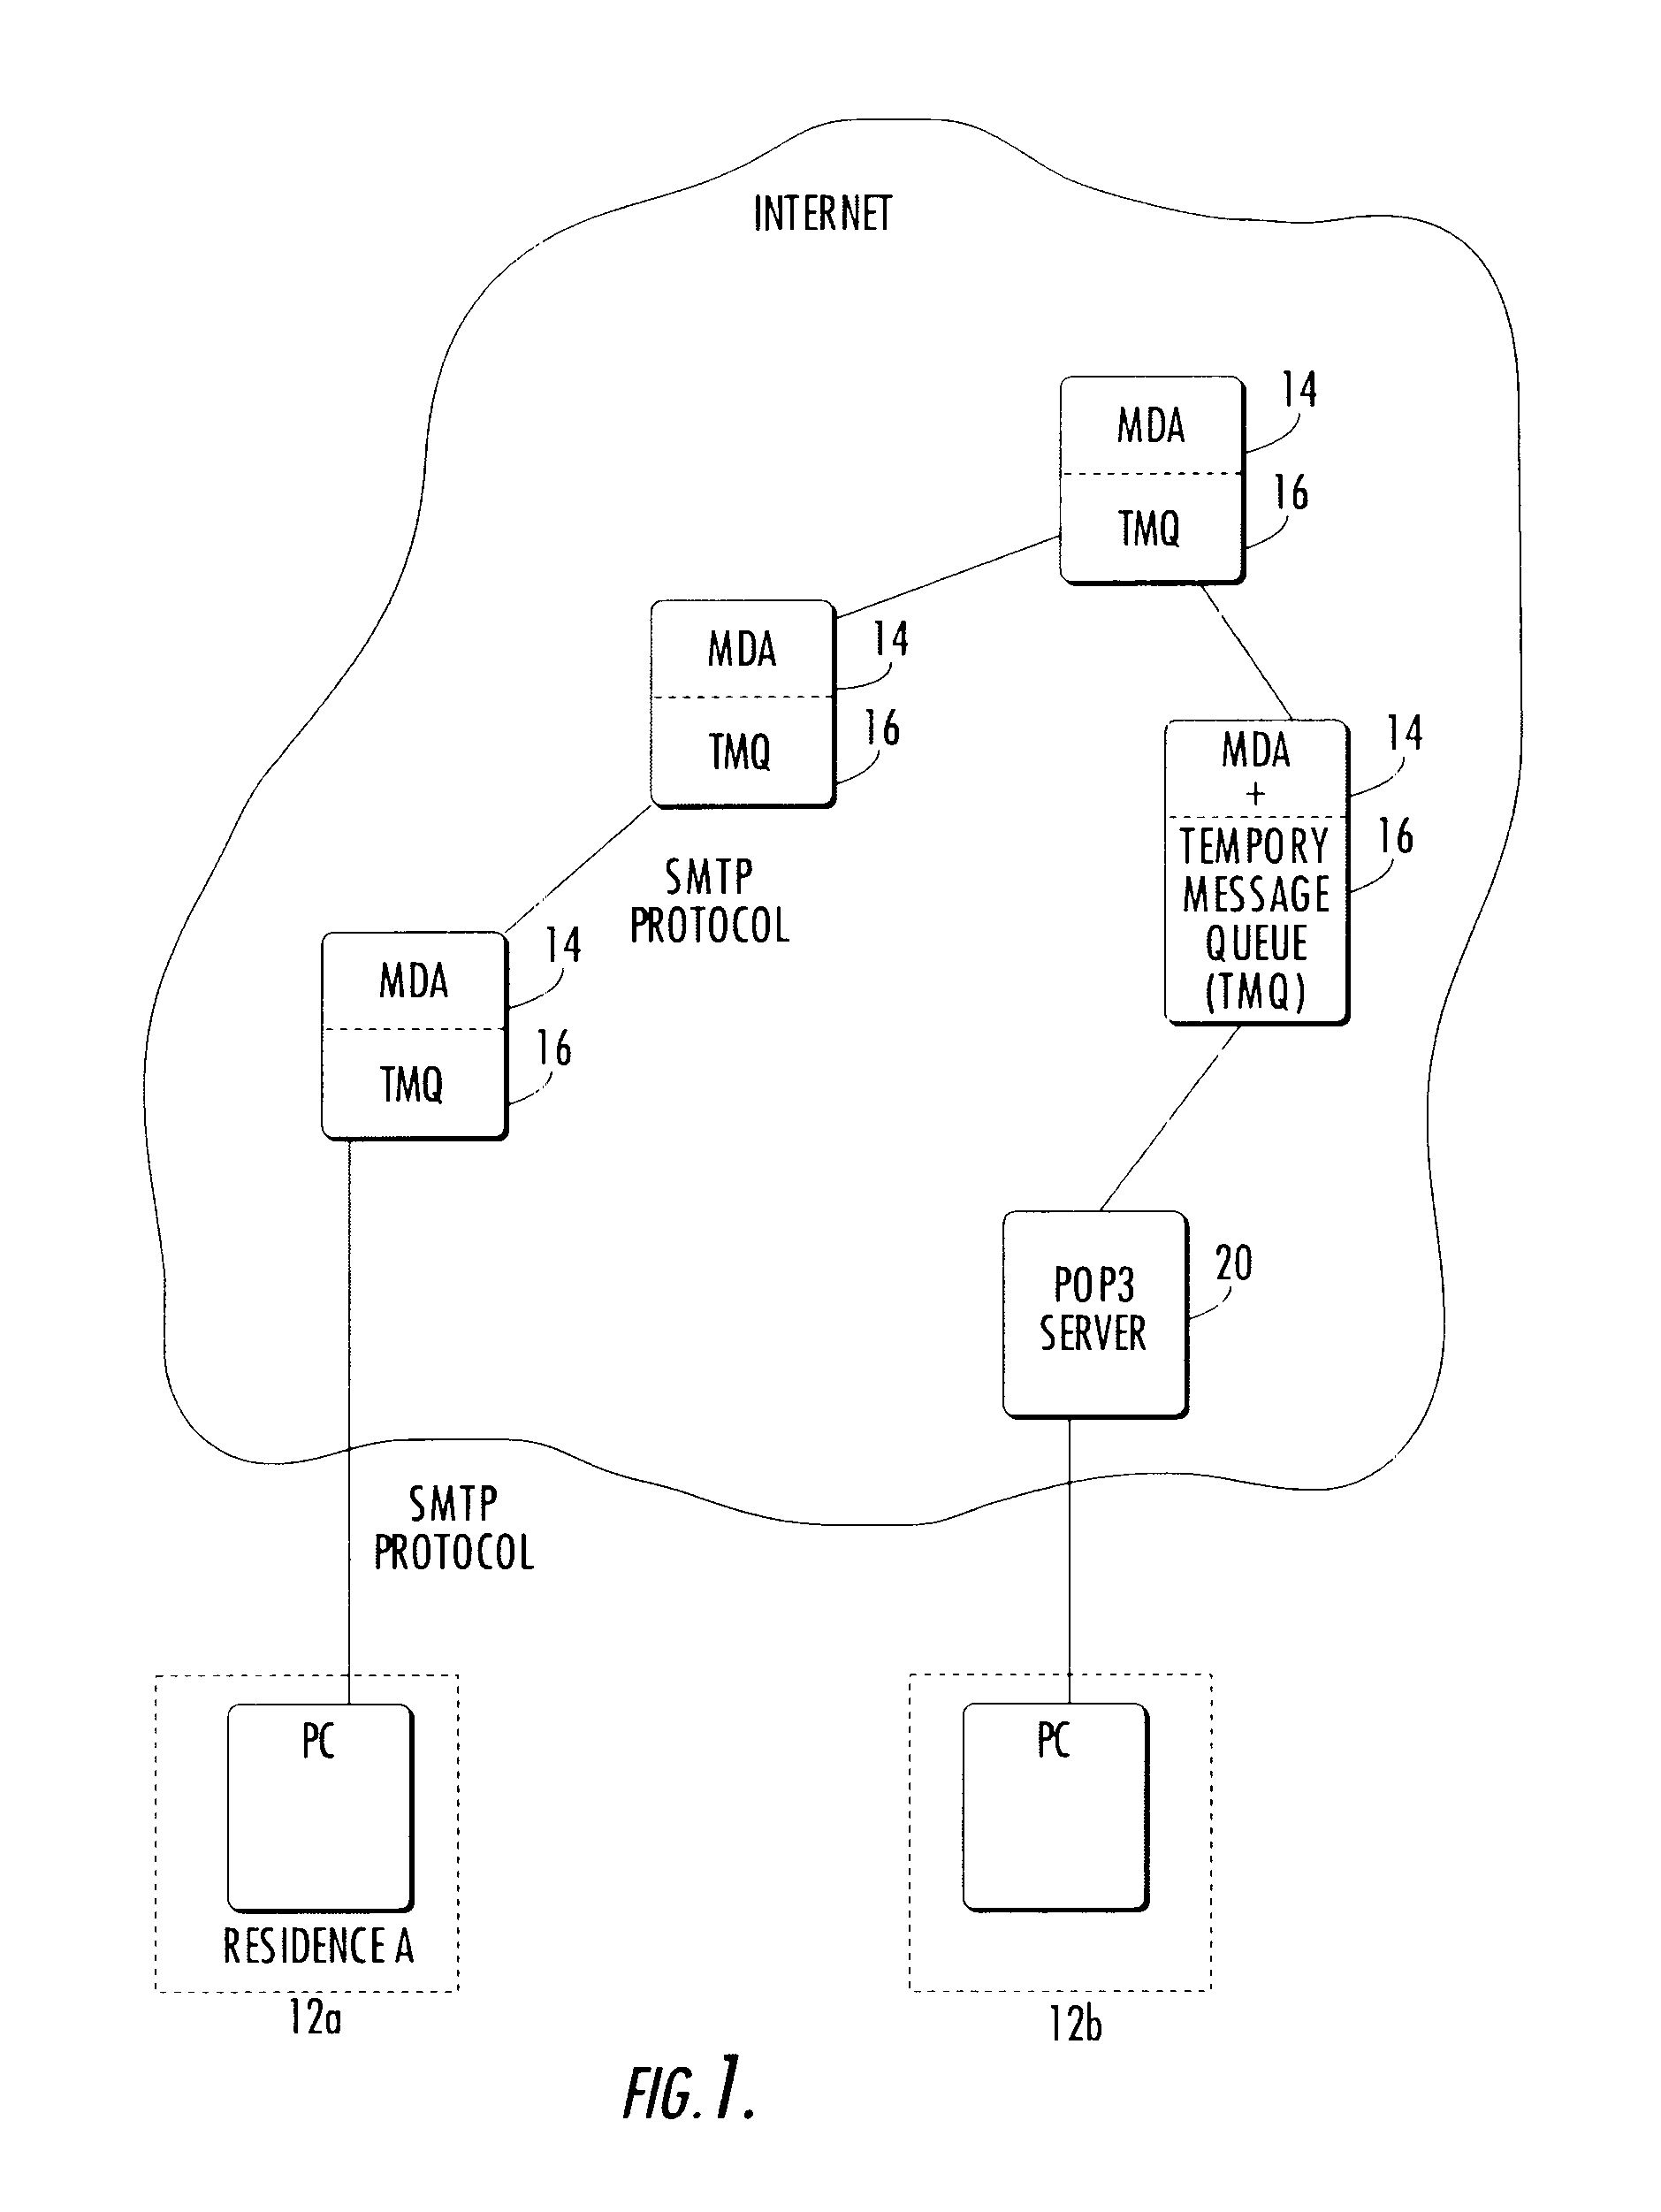 Smart card device and method used for transmitting and receiving secure e-mails